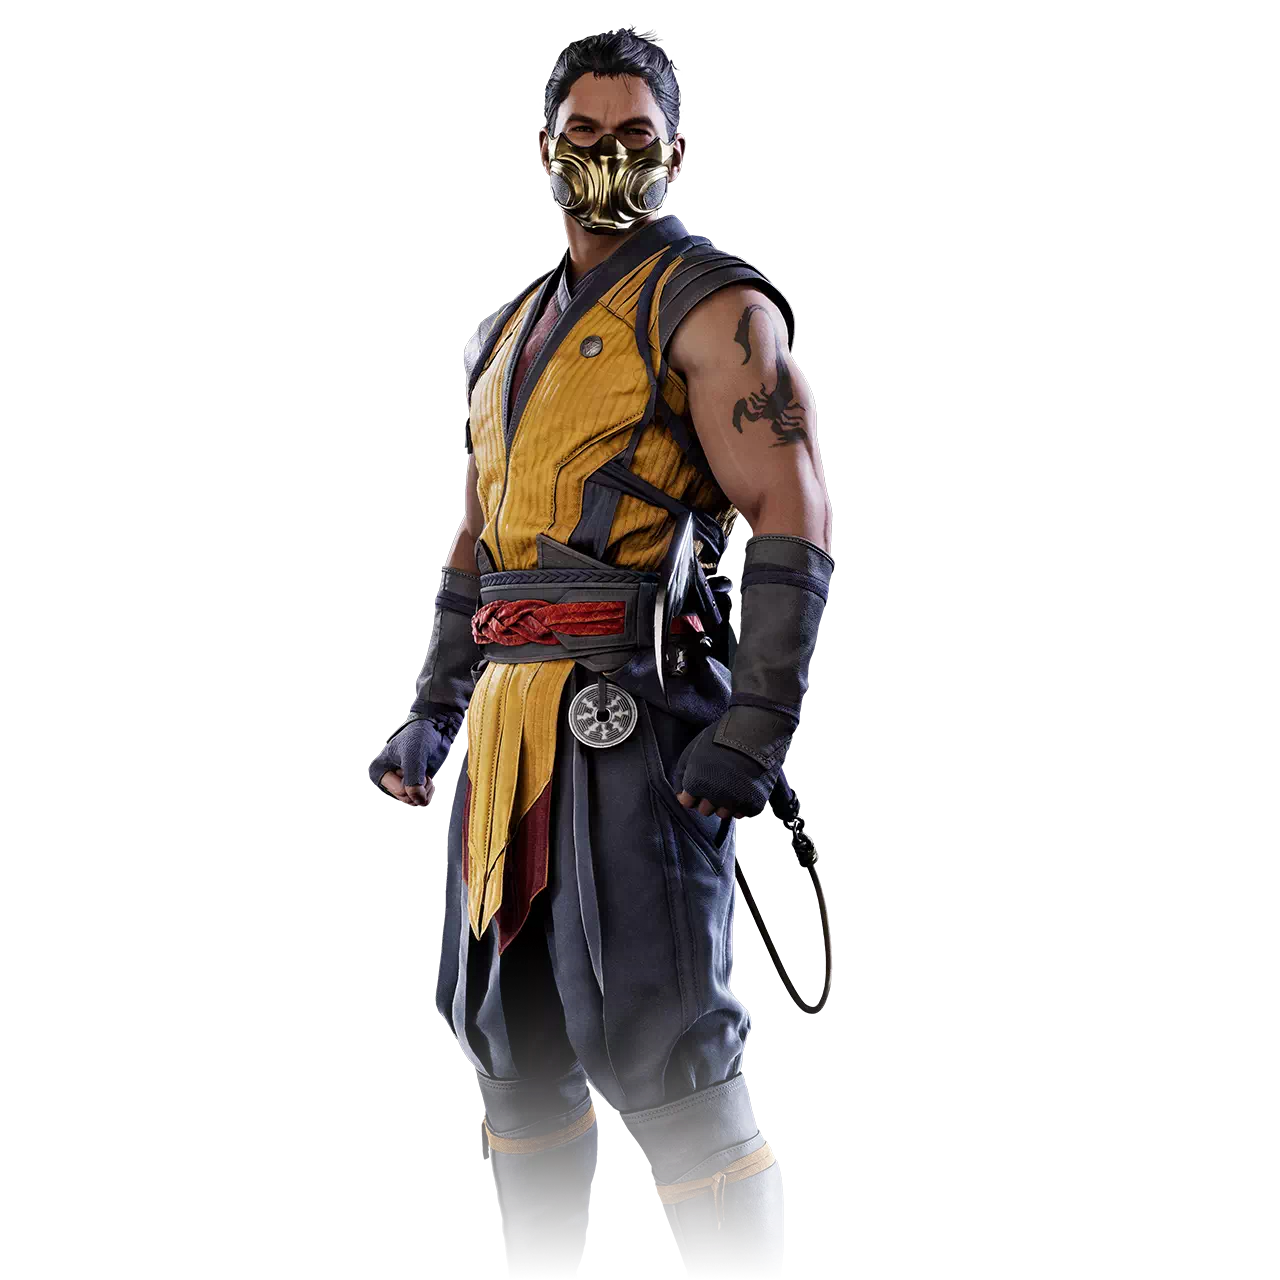 Mortal Kombat 1 Character renders compared to the their last